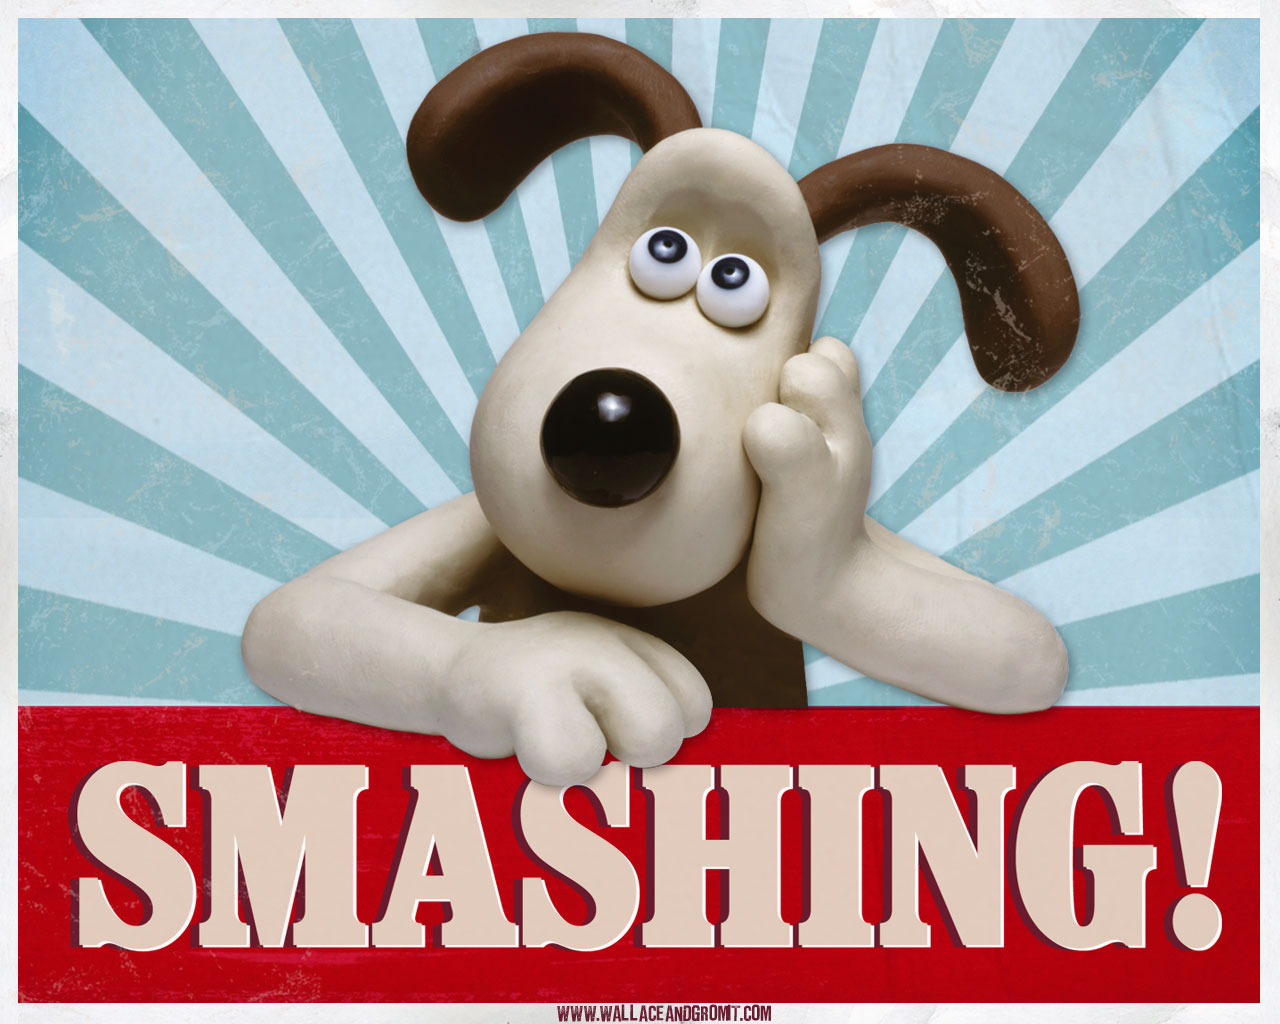 Wallpapers Wallace and Gromit 1280x1024